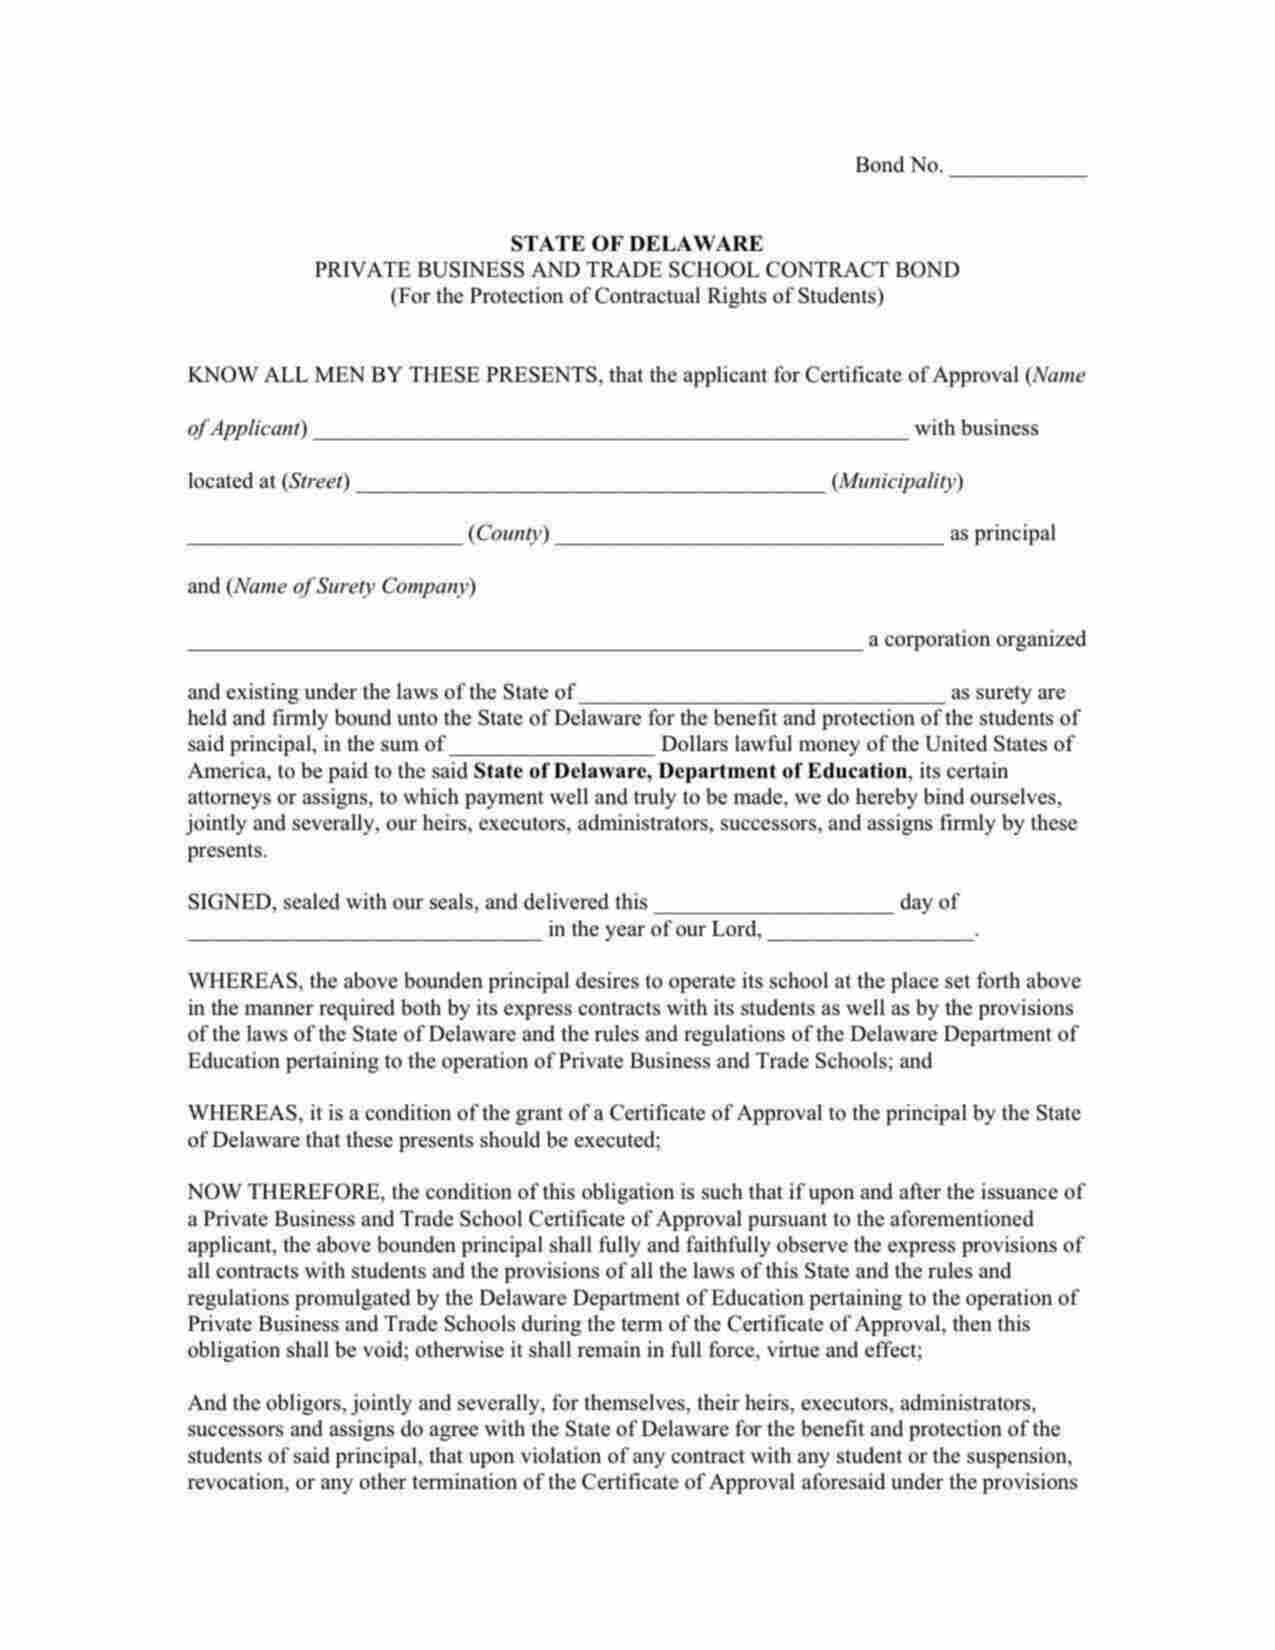 Delaware Private Business and Trade School Contract Bond Form